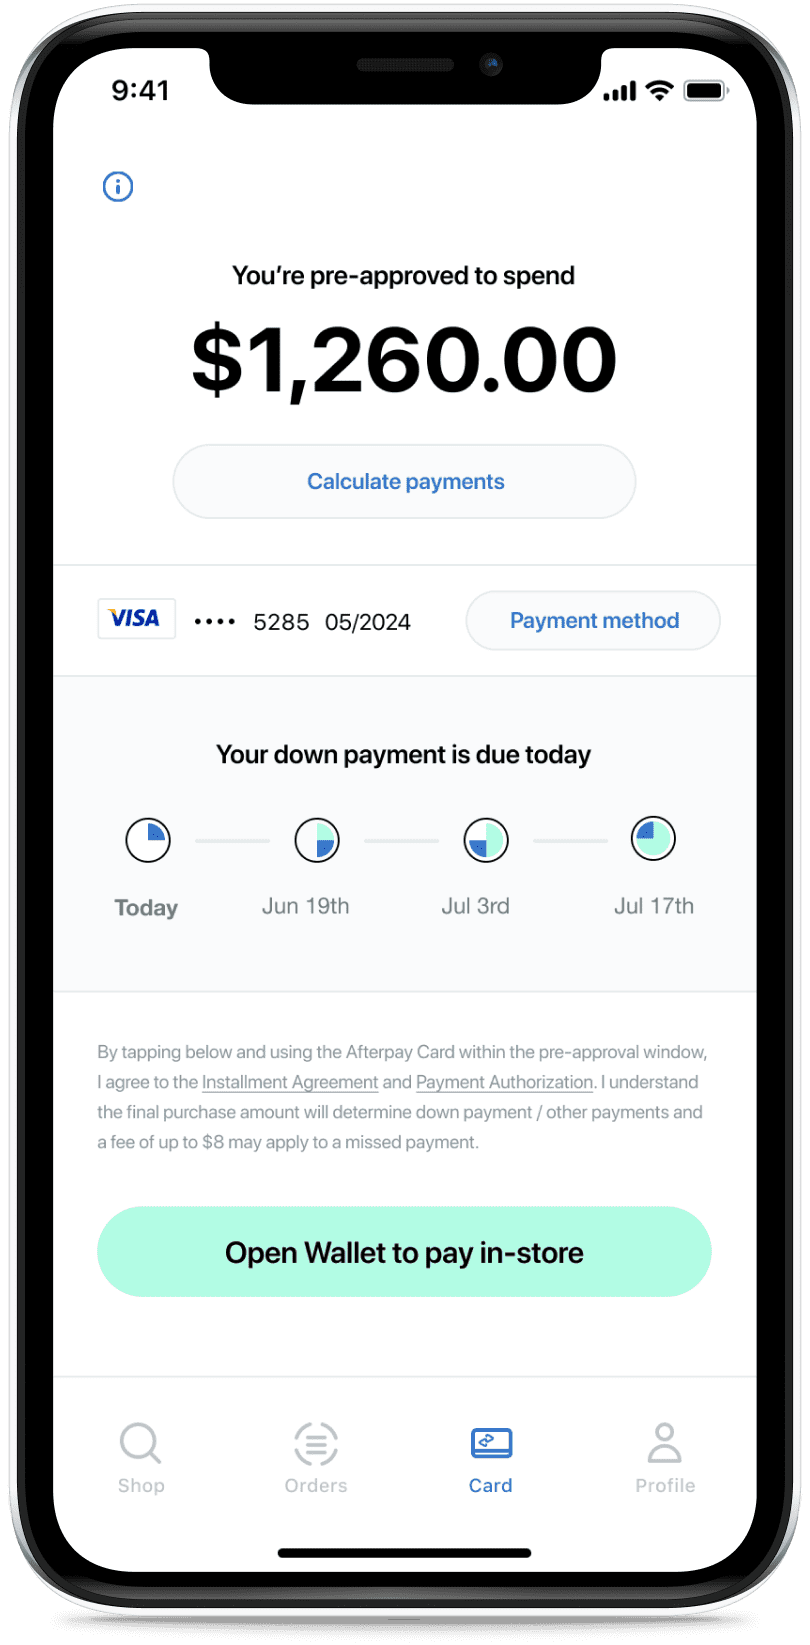 Afterpay - FREE Delivery